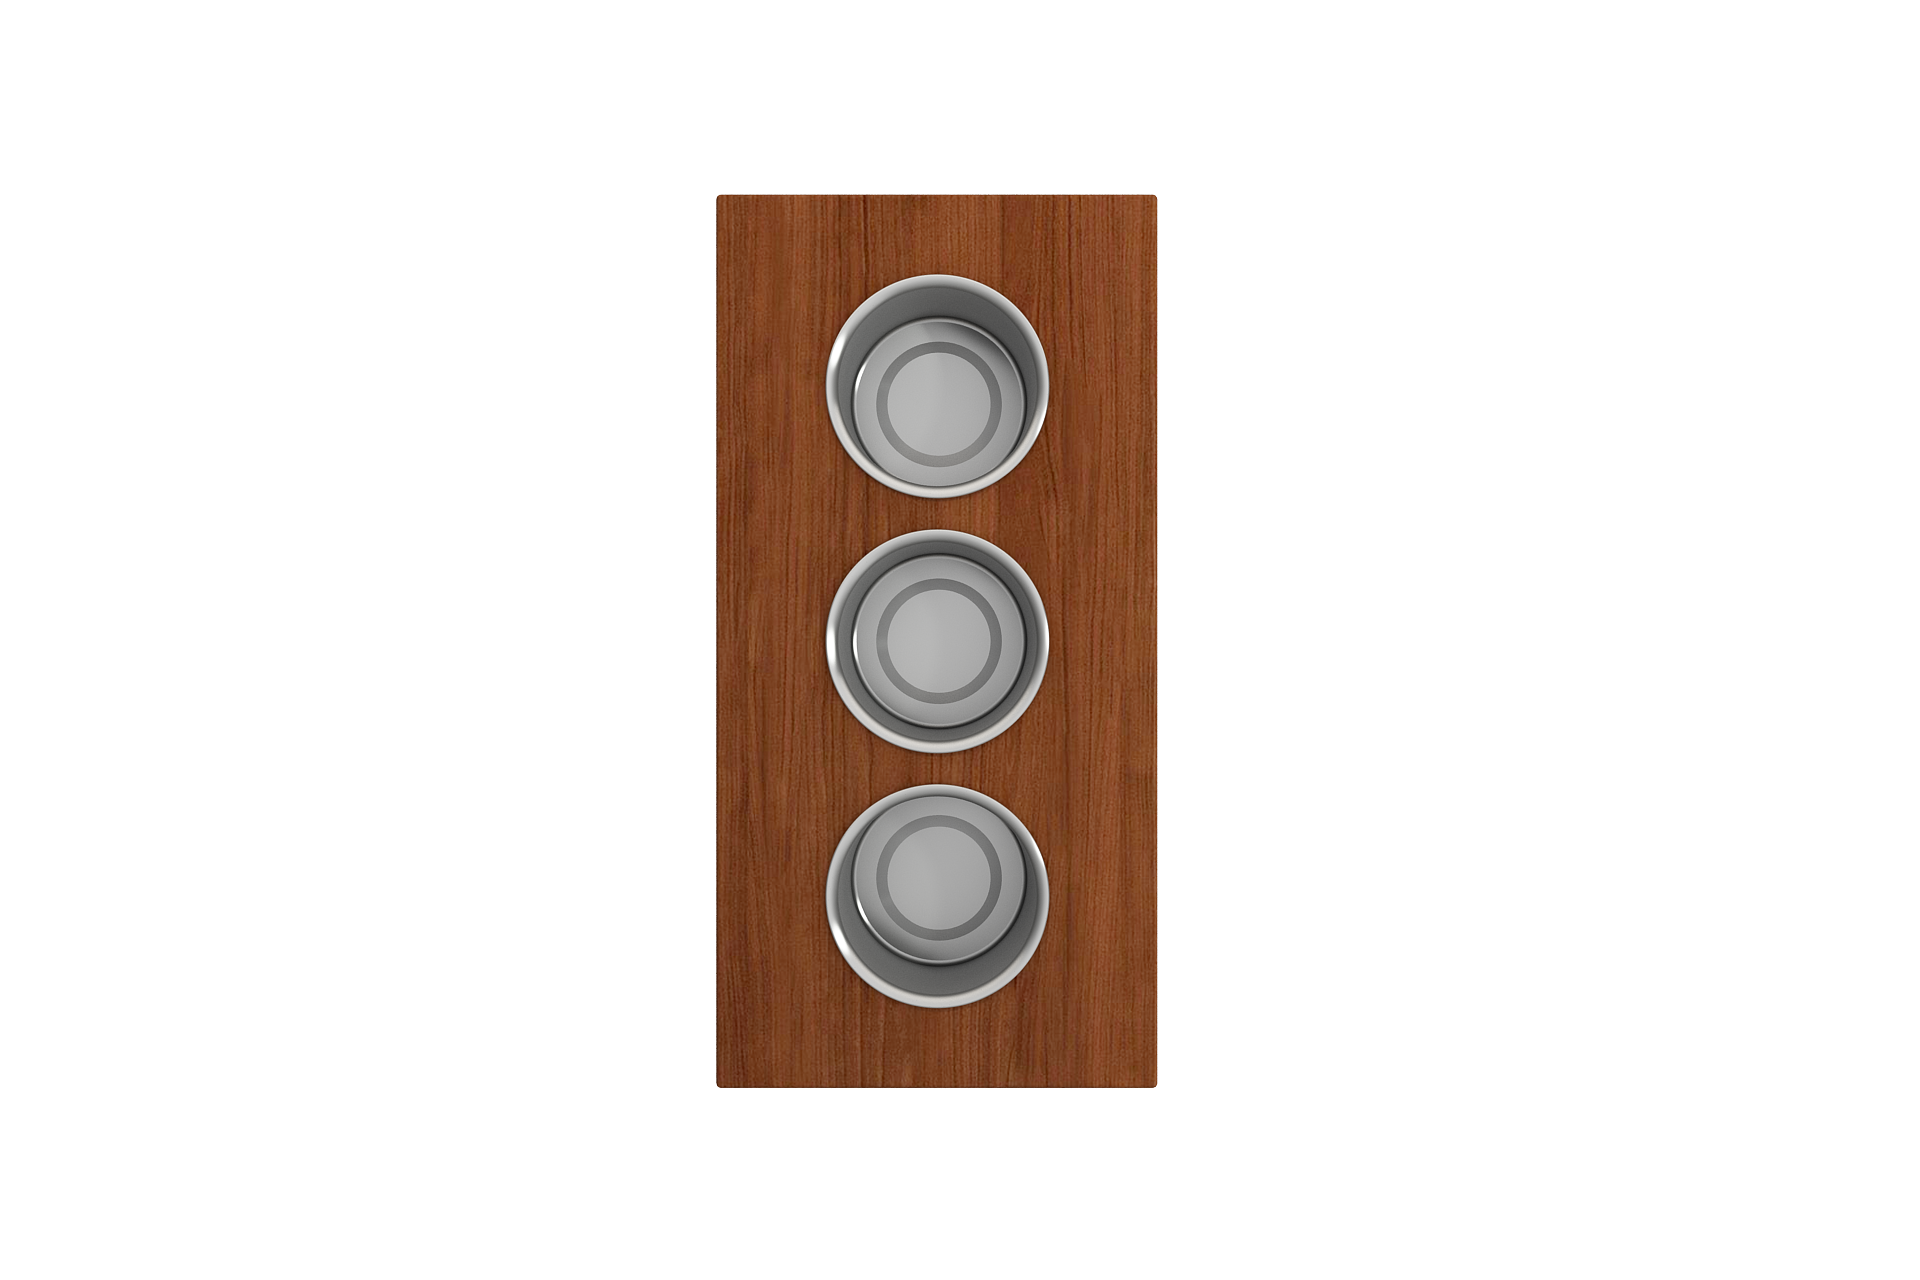 BOCCHI 2320 0010 Wood Board with 3 Round Stainless Steel Bowls